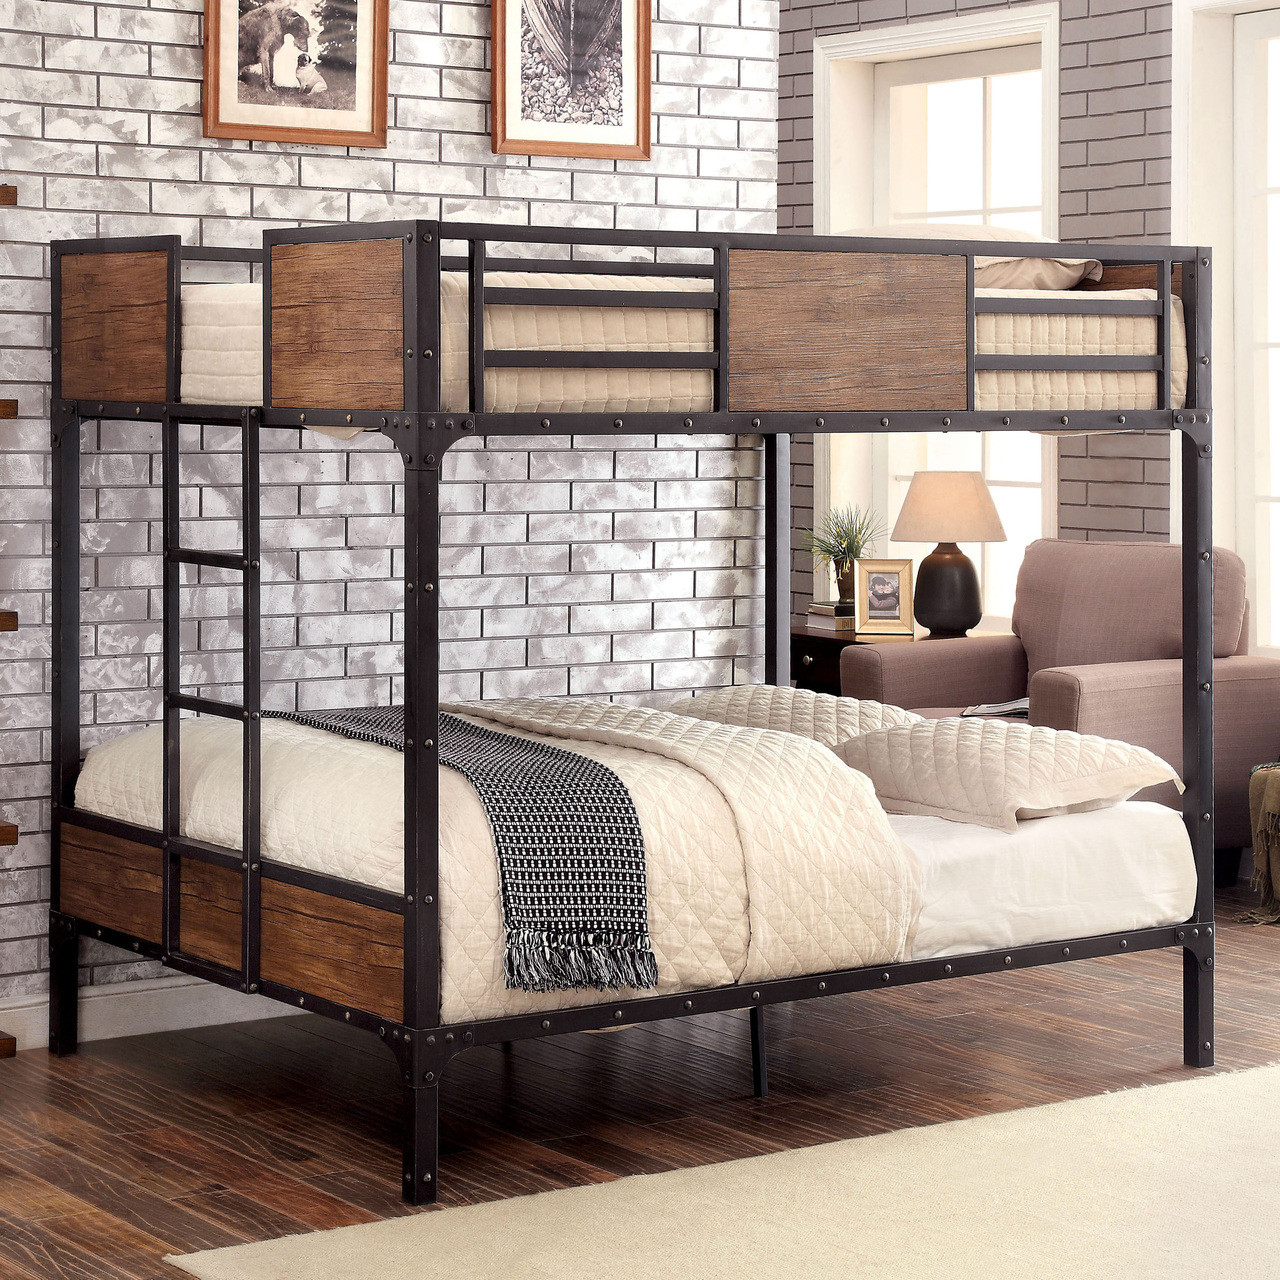 full size bunk beds for adults